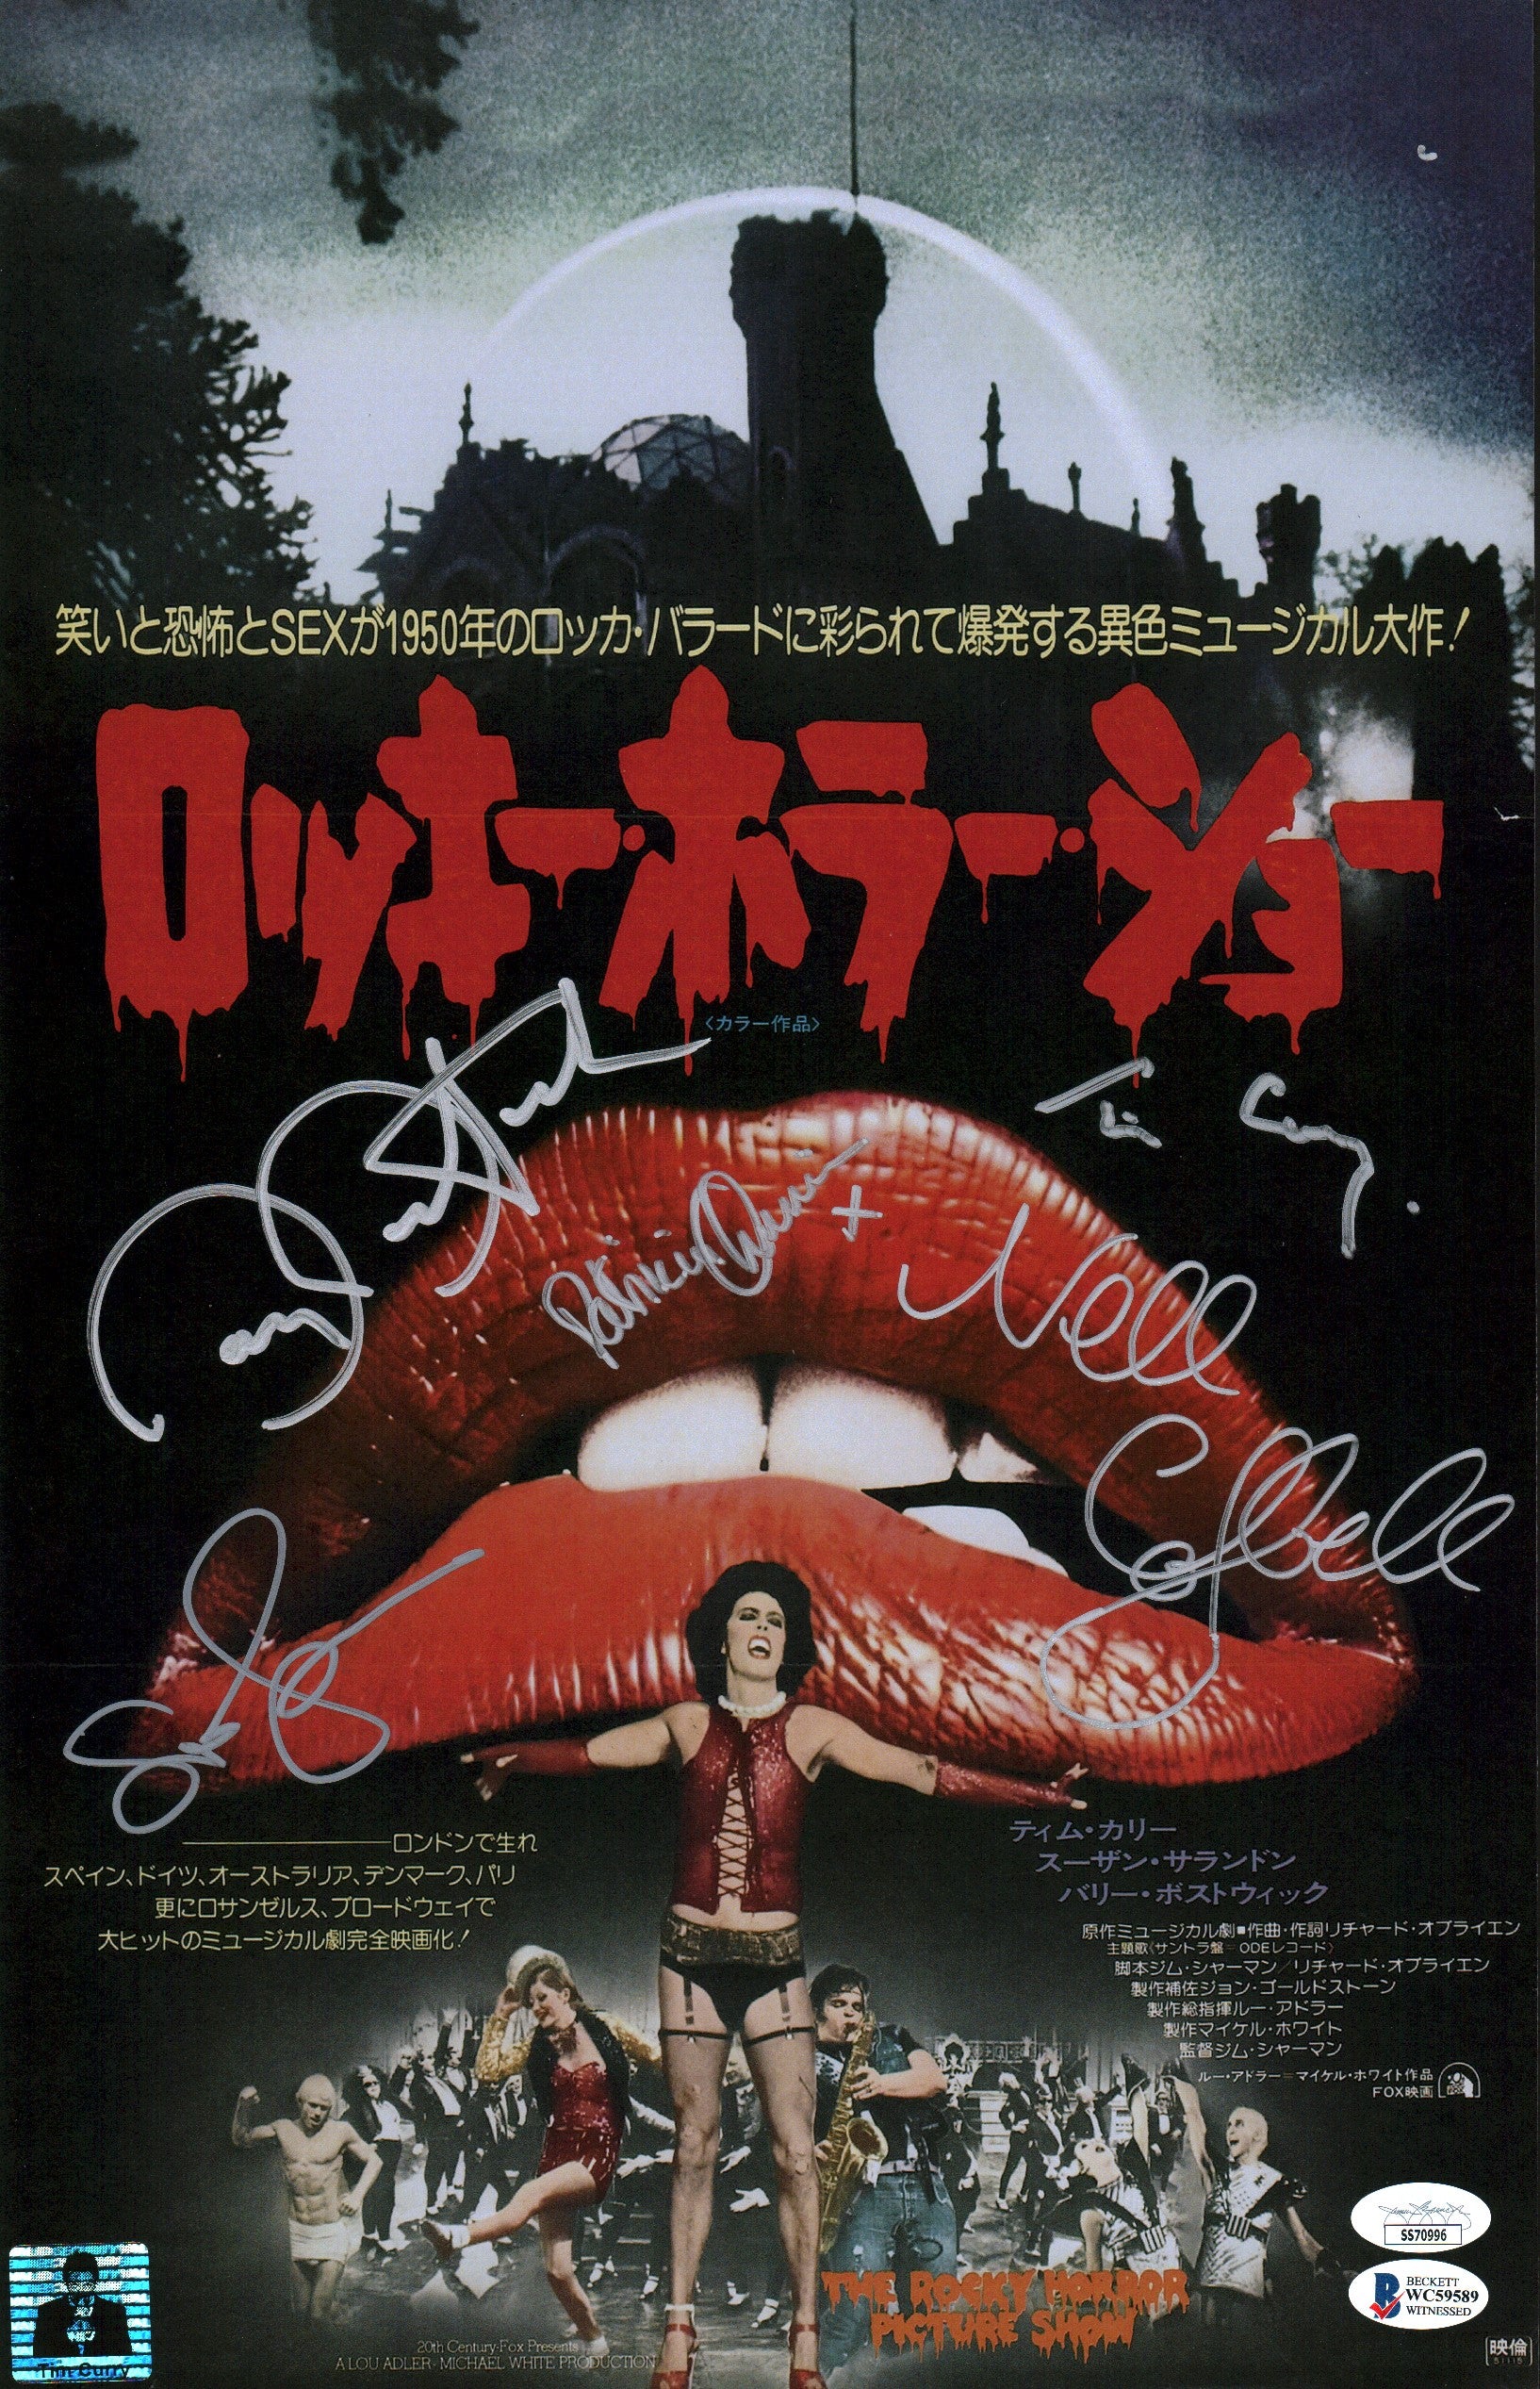 The Rocky Horror Picture Show RHPS 11x17 Signed Bostwick Campbell Curry Quinn Sarandon Cast Photo Poster JSA Beckett Certified COA Autograph